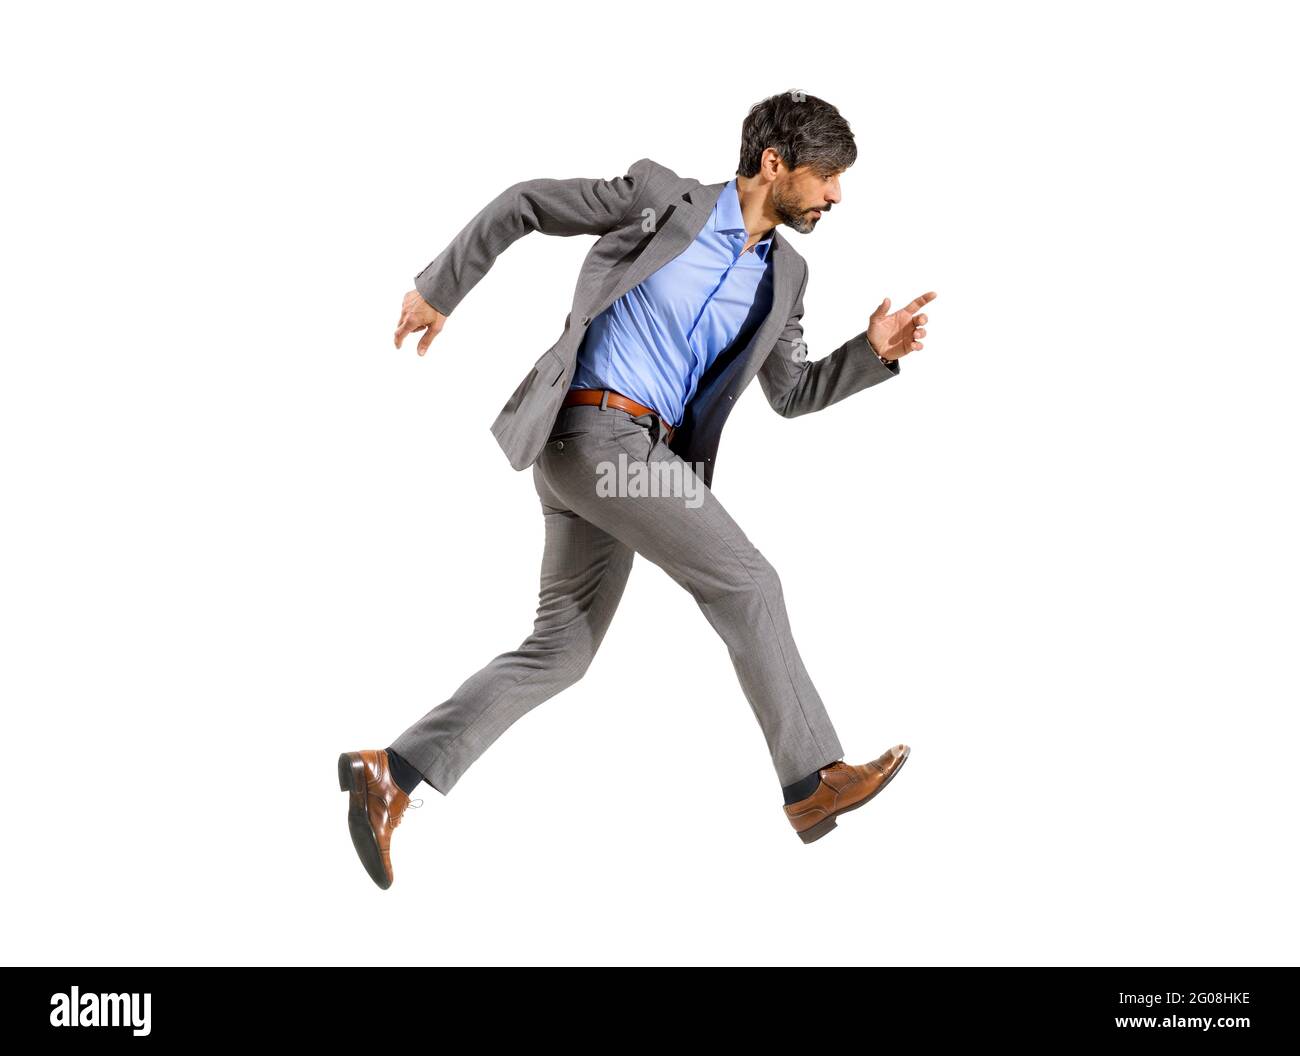 Businessman in a stylish suit walking very fast in a hurry with a determined focused expression striding out over a white background Stock Photo